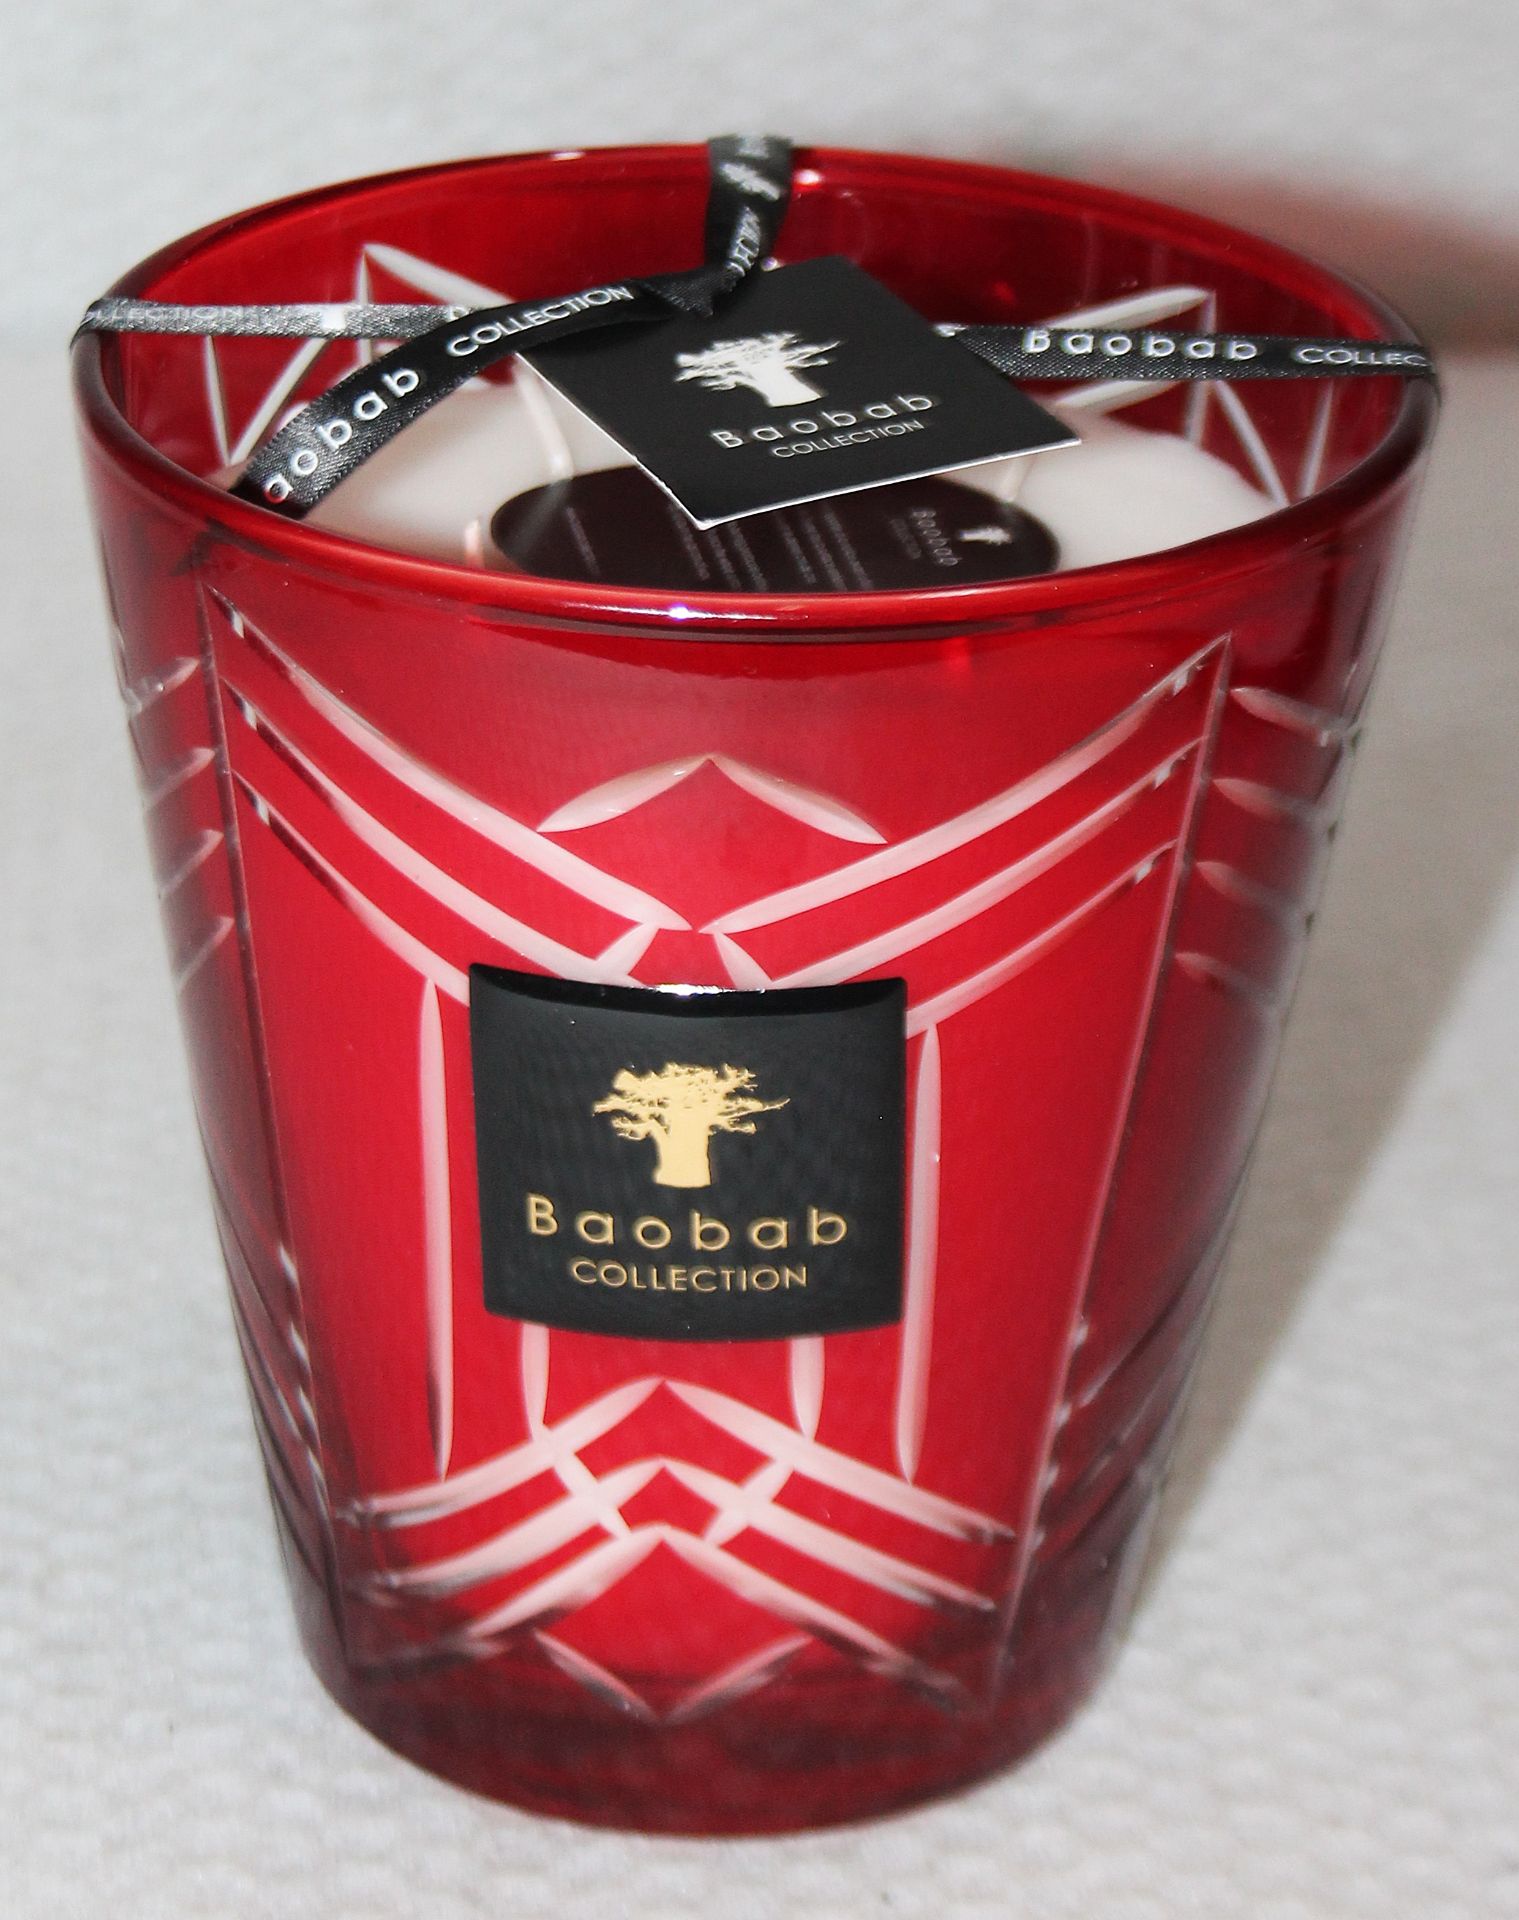 1 x BAOBAB COLLECTION High Society 'Louise' Luxury Candle In A Hand-Engraved Red Glass Jar - - Image 2 of 9